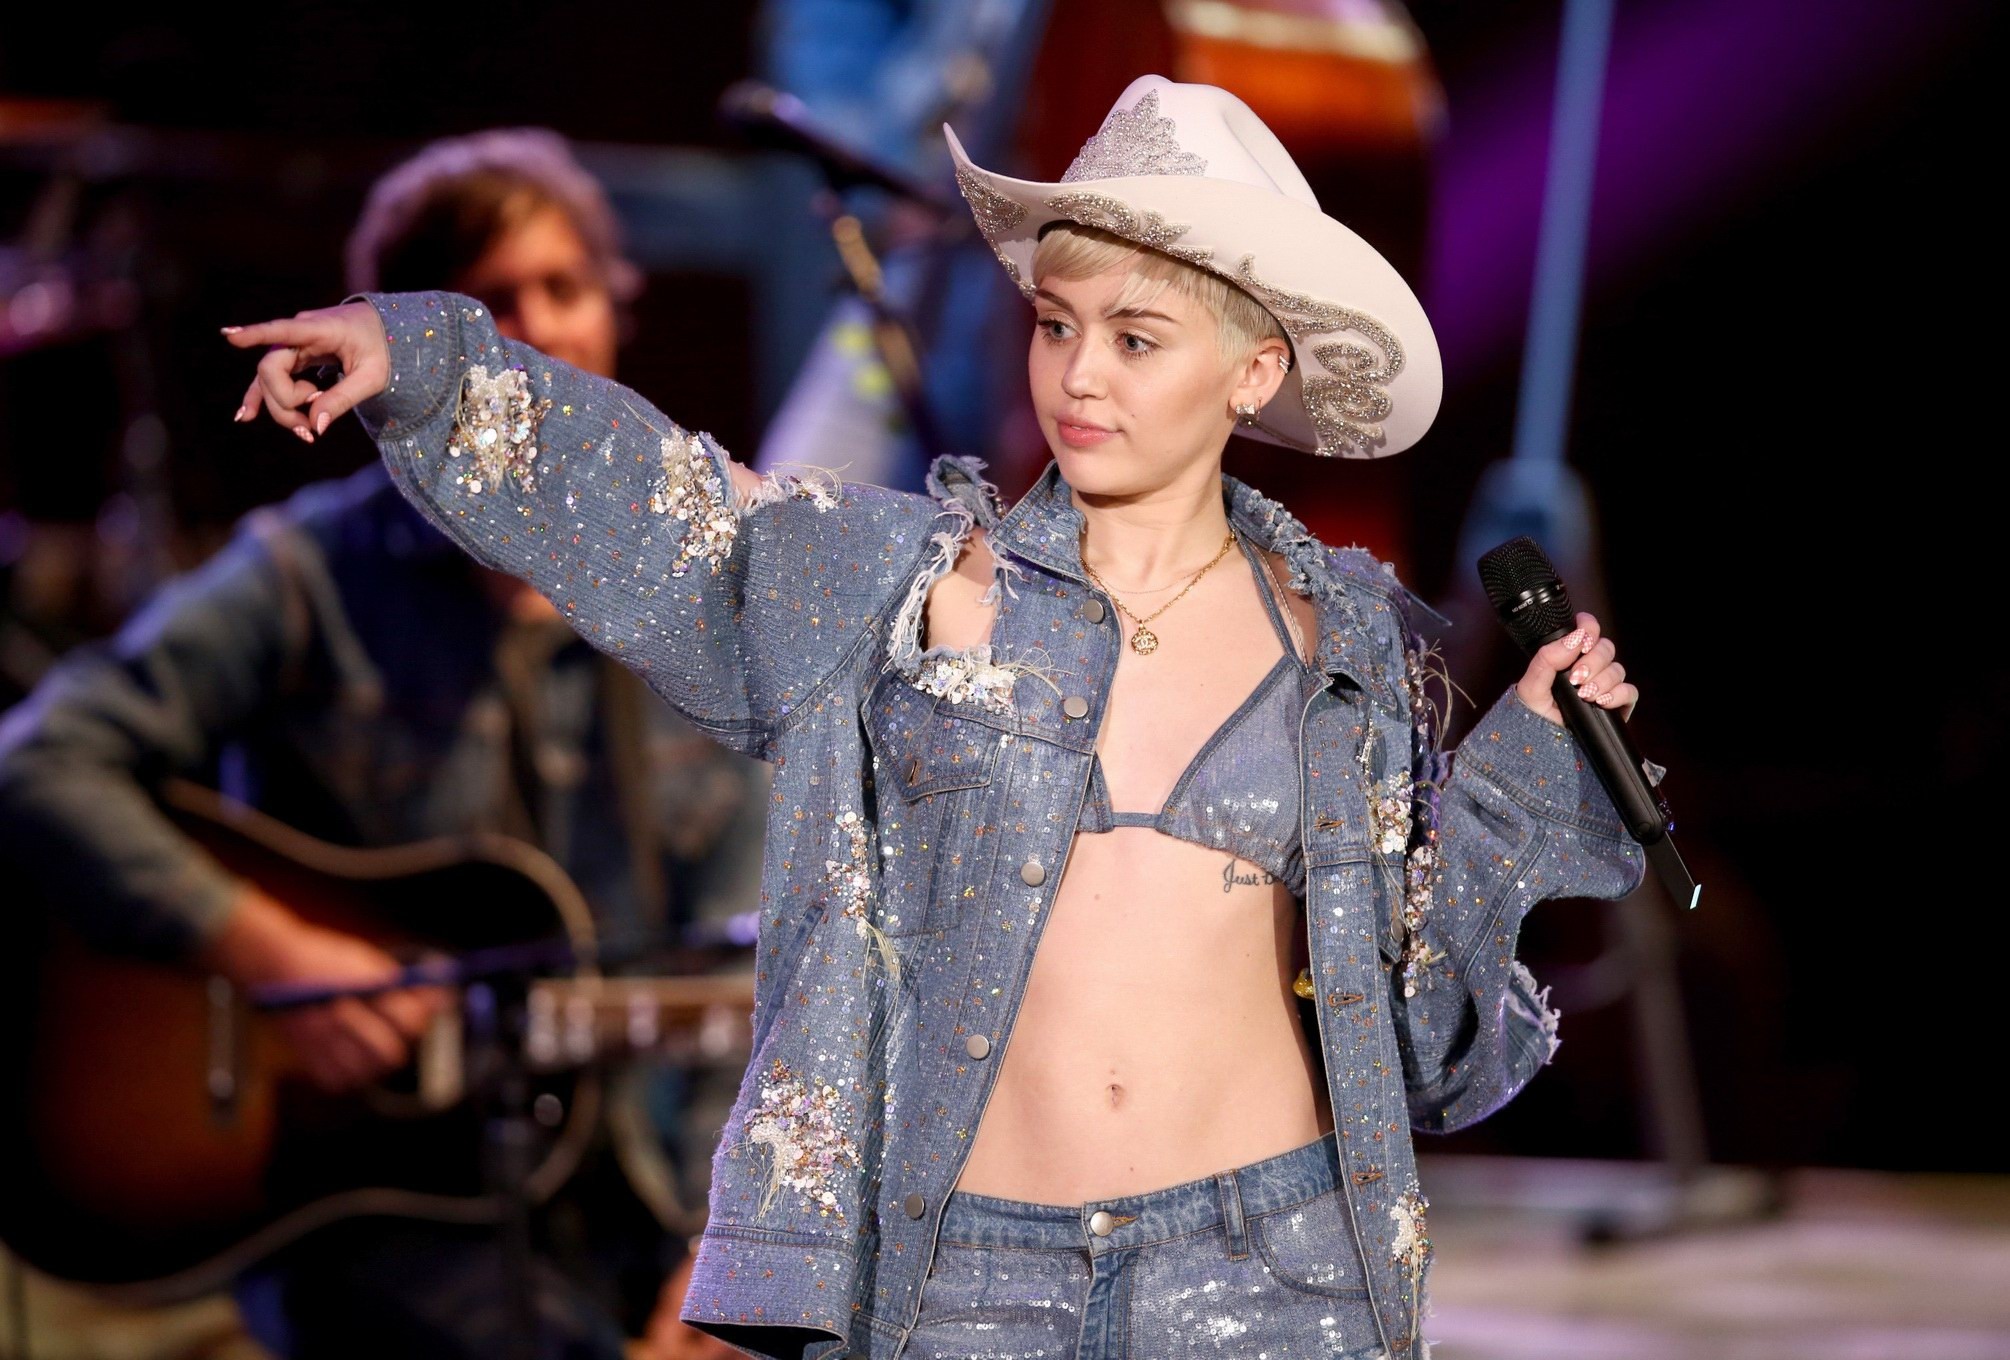 Miley Cyrus perofrming in denim bra  ripped jeans at MTV Unplugged in Hollywood  #75205891